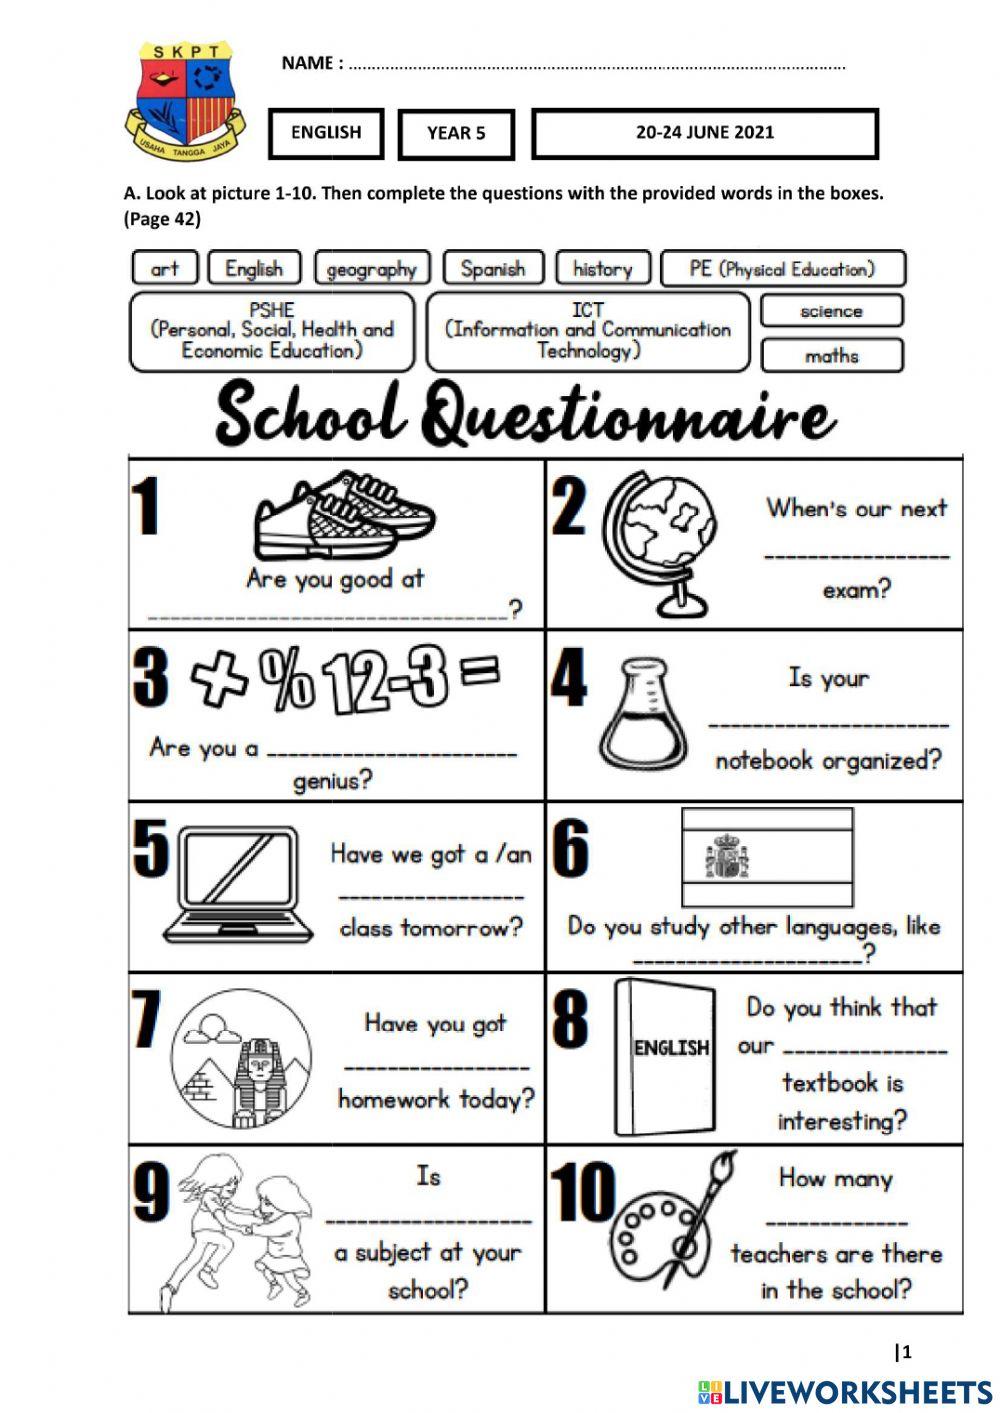 Year 5 Plus 1 - Unit 4 Learning World - Student's Book Pages 42 & 43